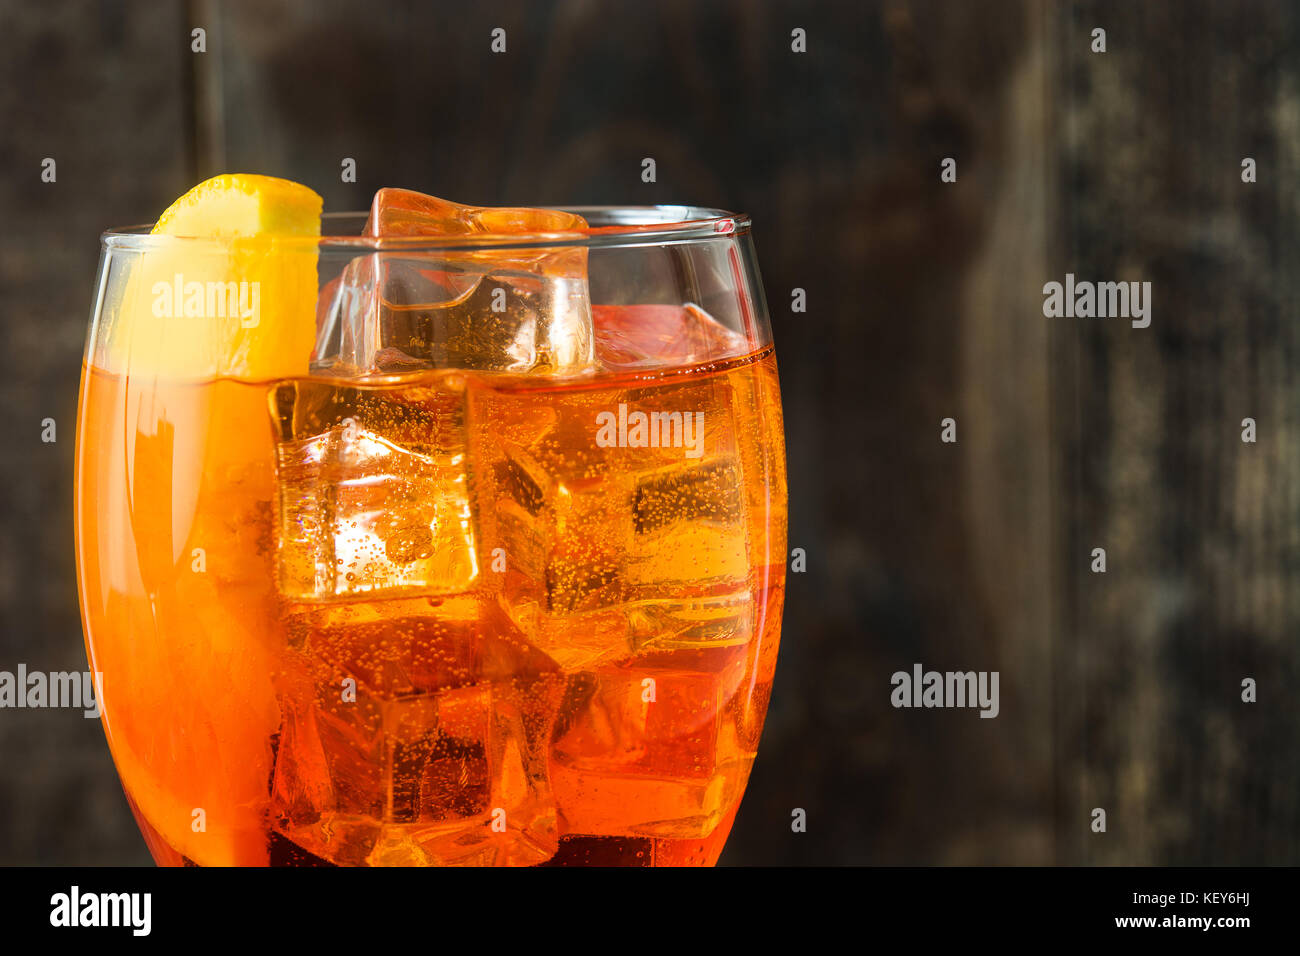 Aperol spritz cocktail in glass on wooden table Stock Photo